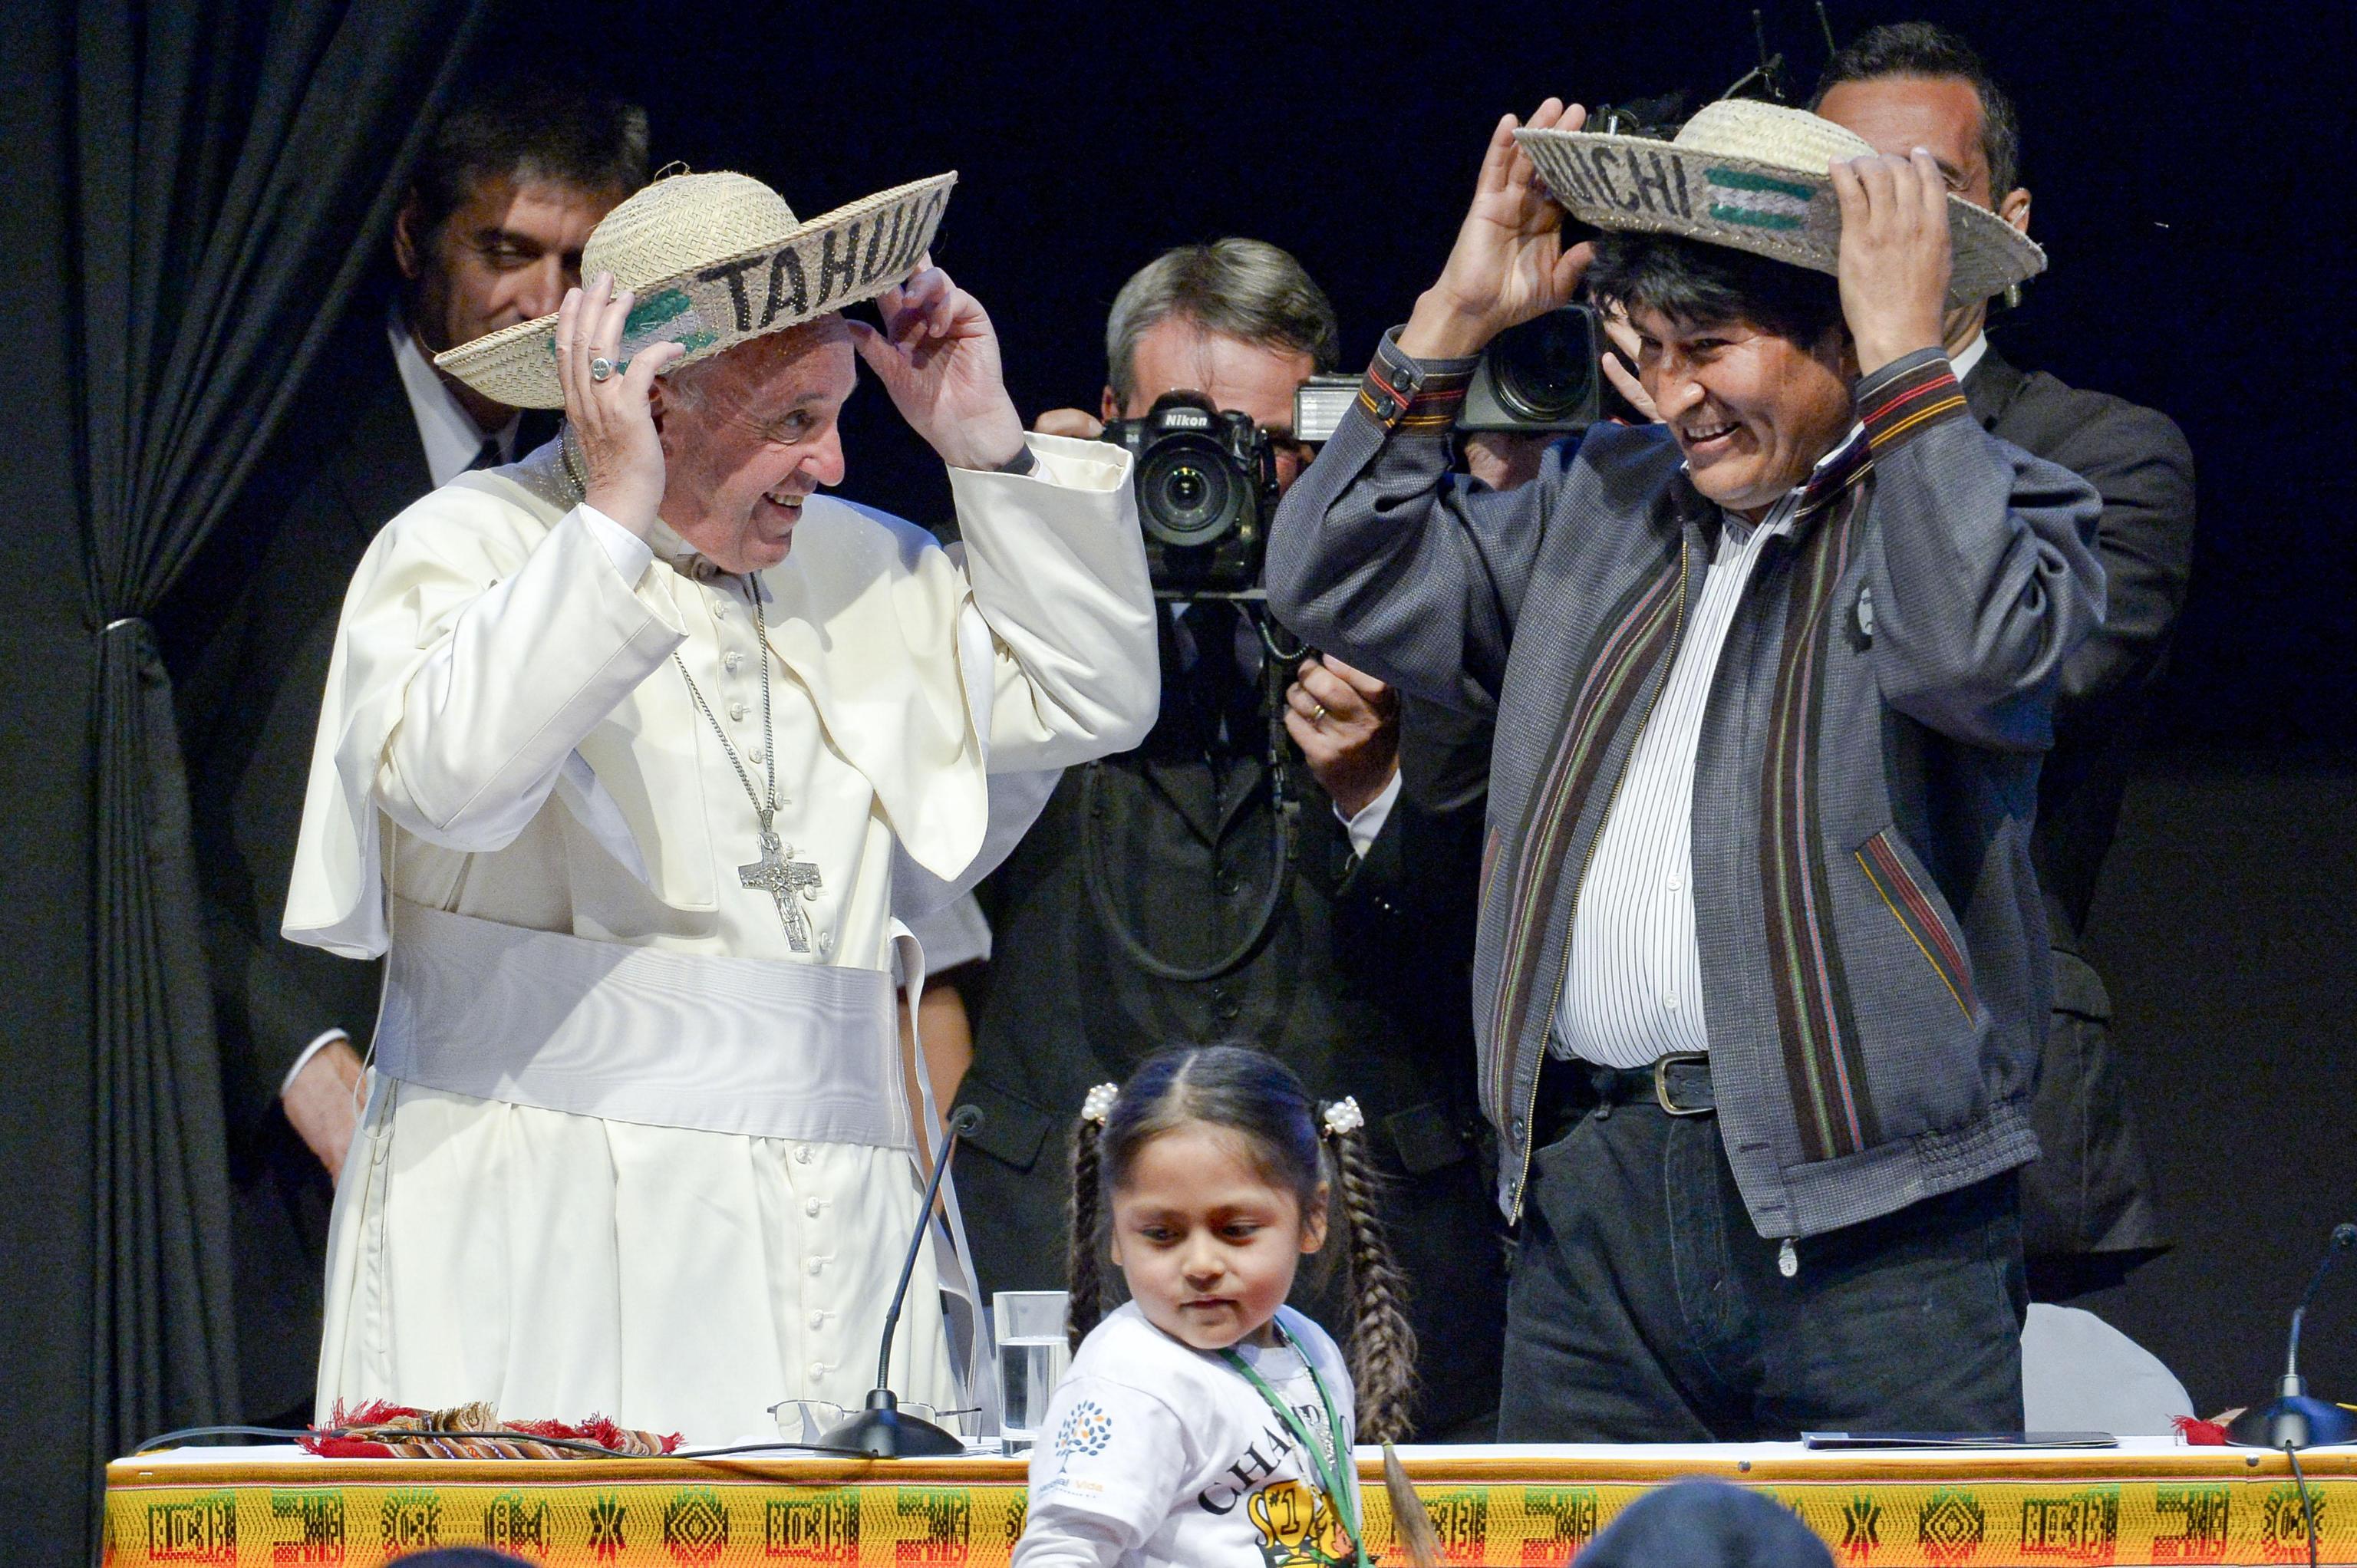 Pope Francis and Bolivian President Evo Morales wearing traditional hats from the region of Santa Cruz